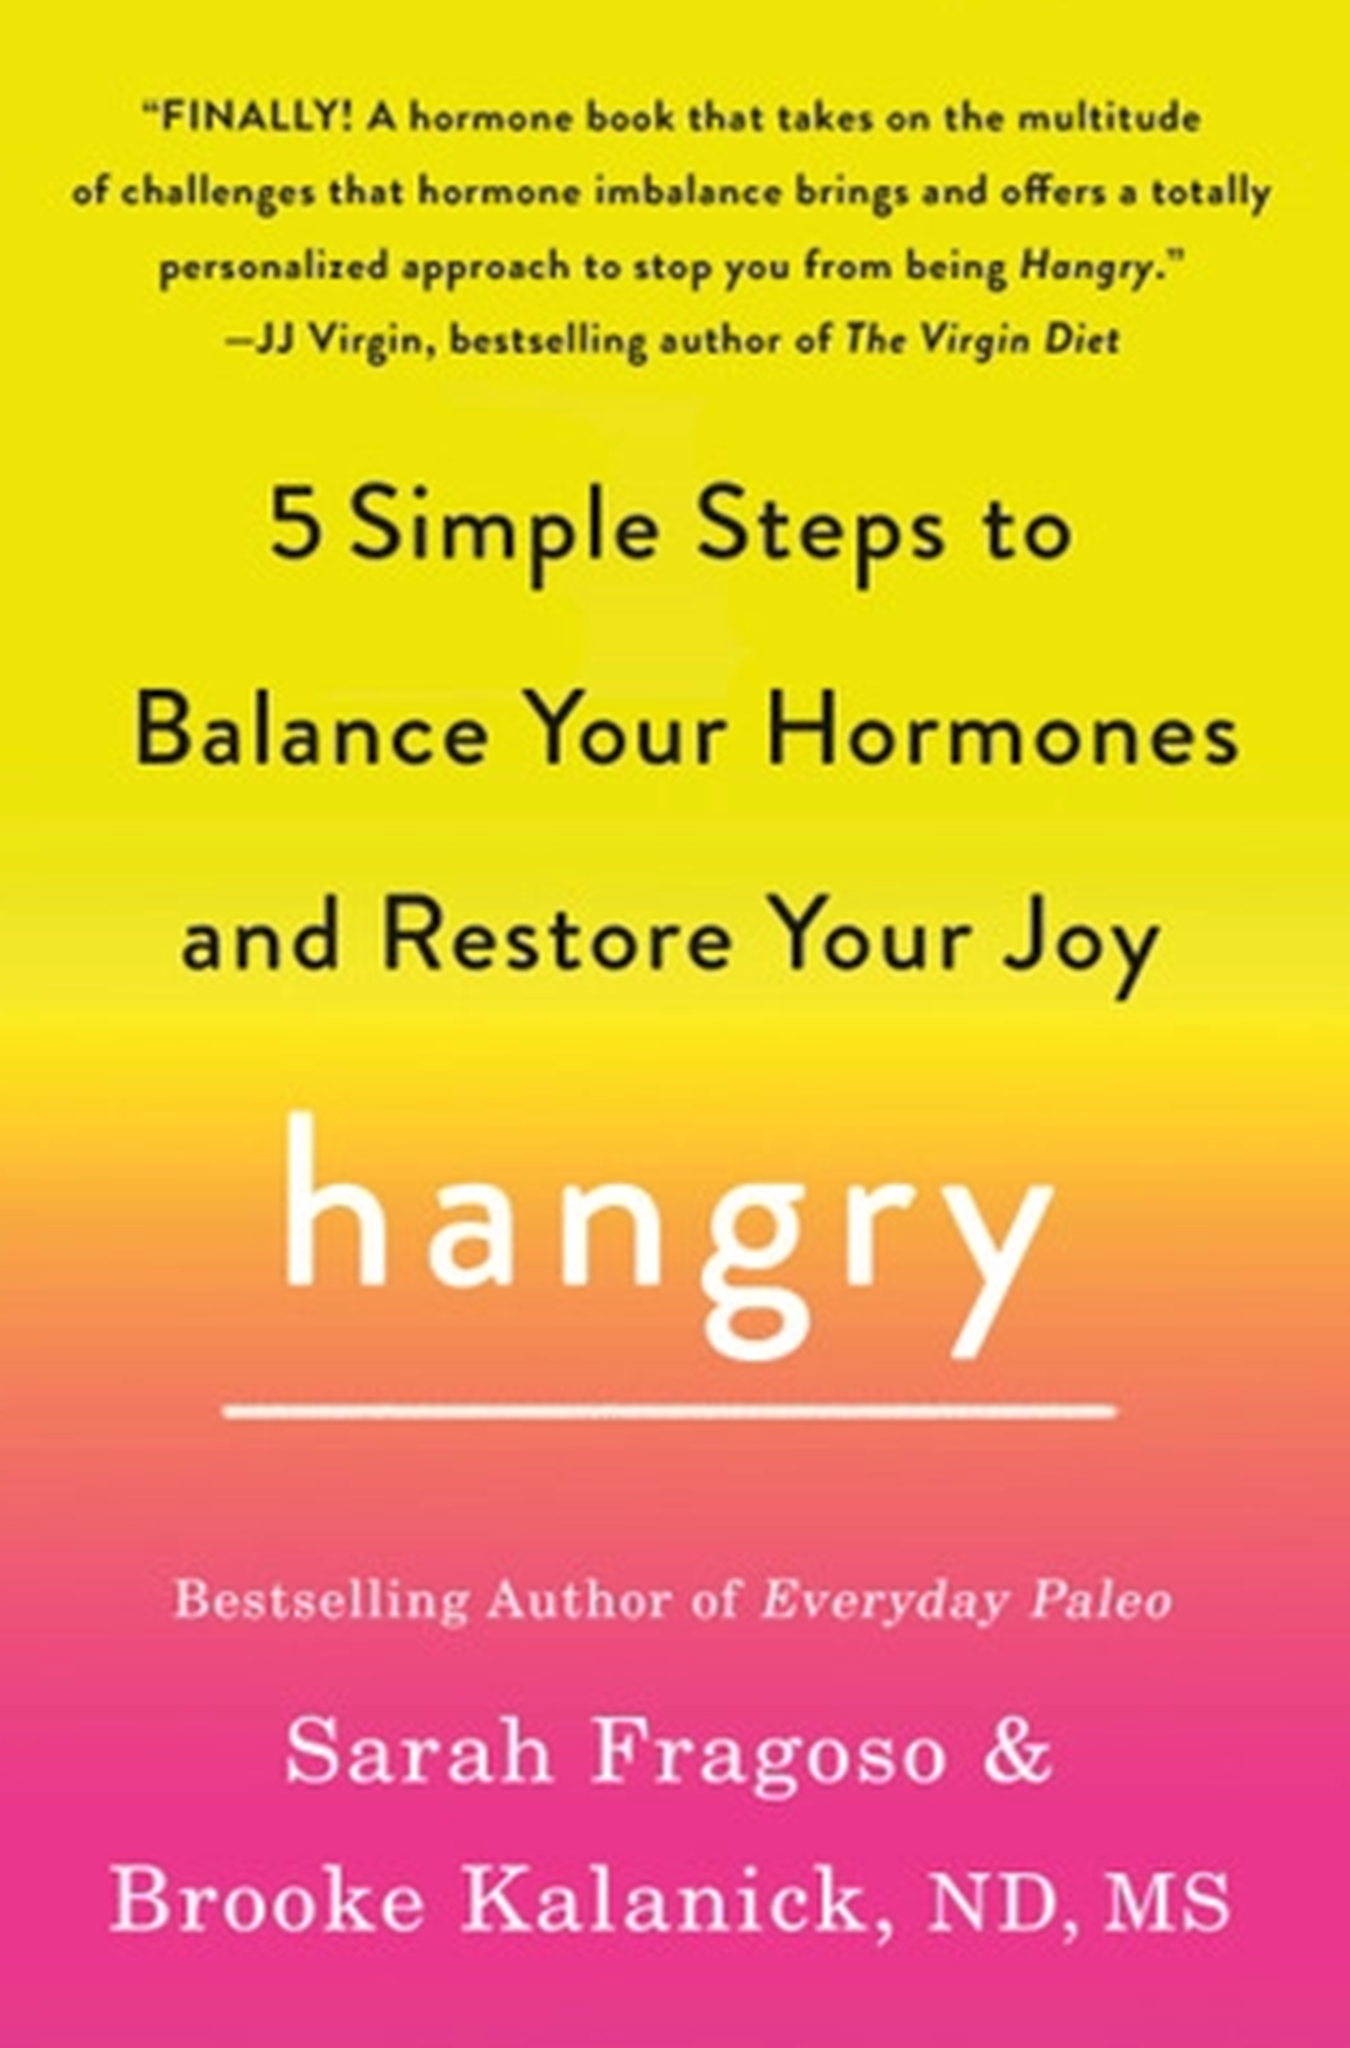 HANGRY: 5 SIMPLE STEPS TO BALANCE YOUR HORMONES AND RESTORE YOUR JOY